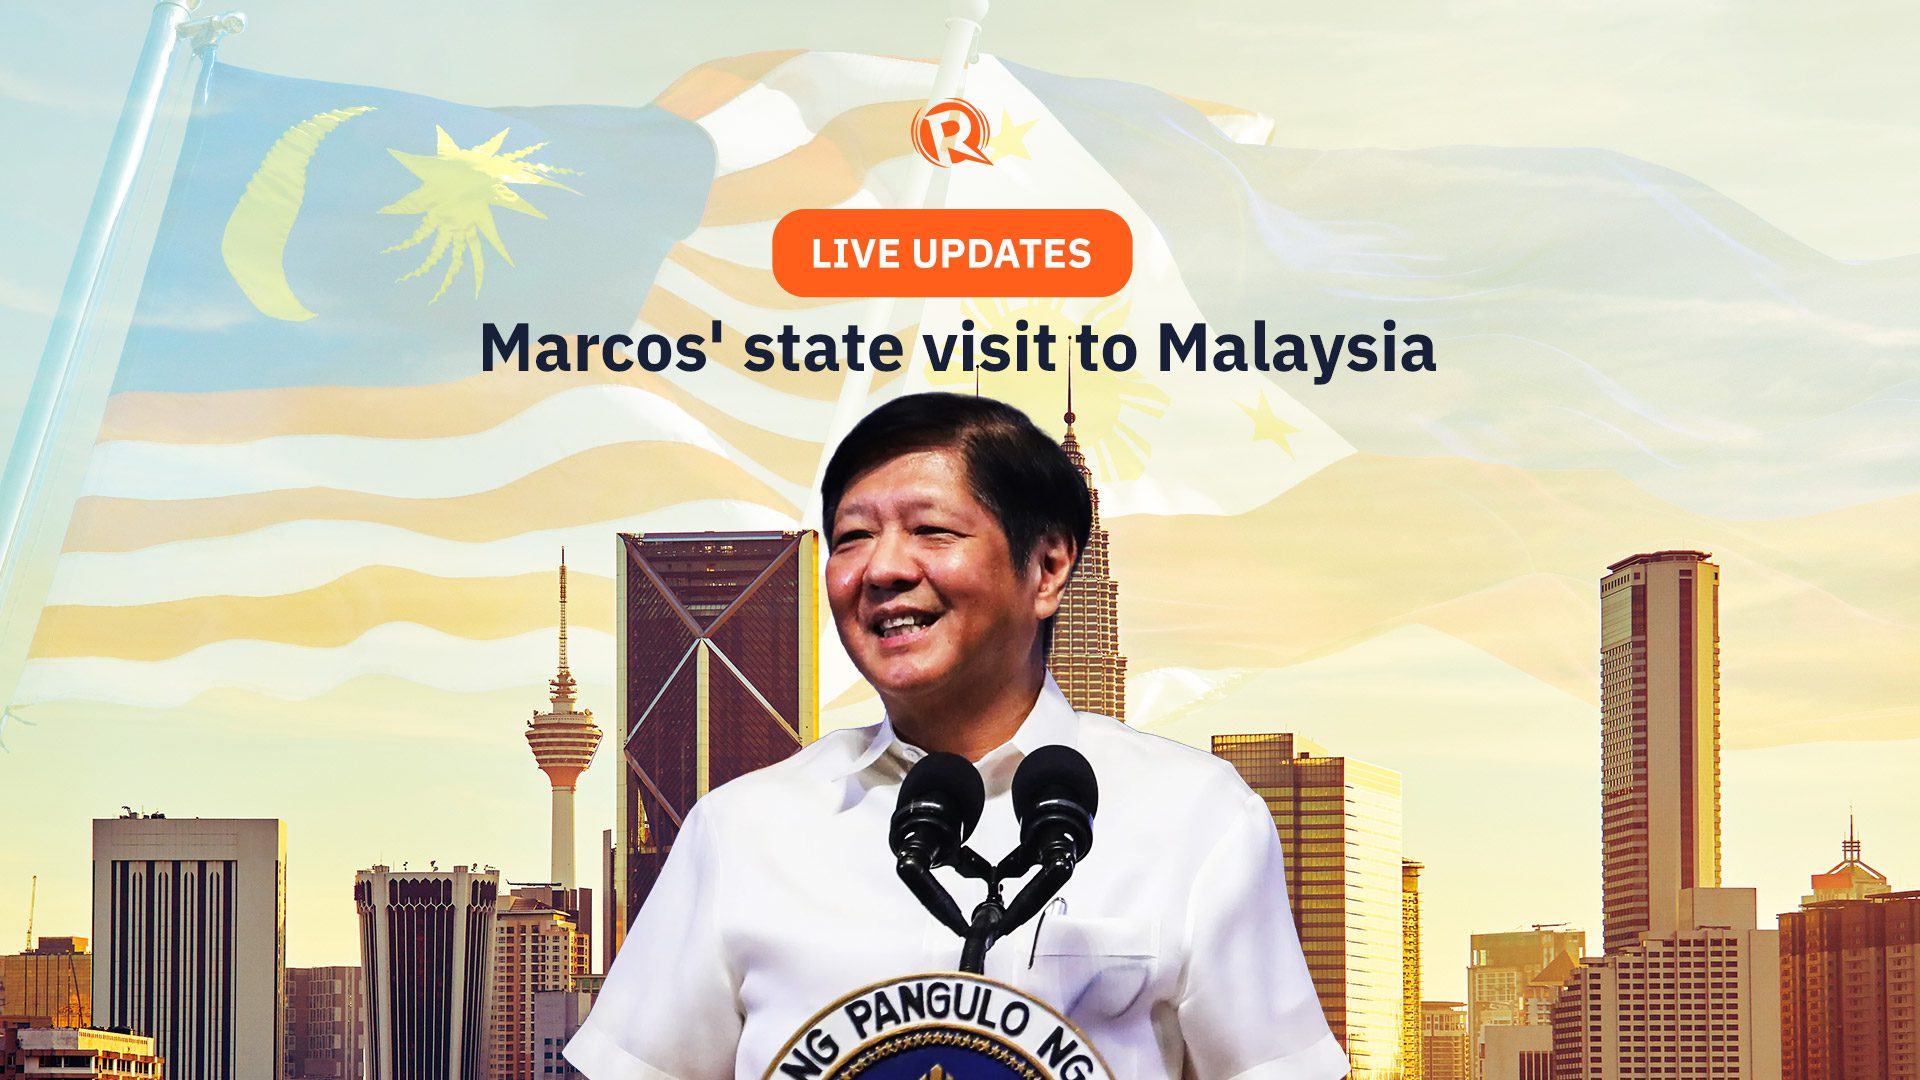 LIVE UPDATES: President Marcos’ state visit to Malaysia